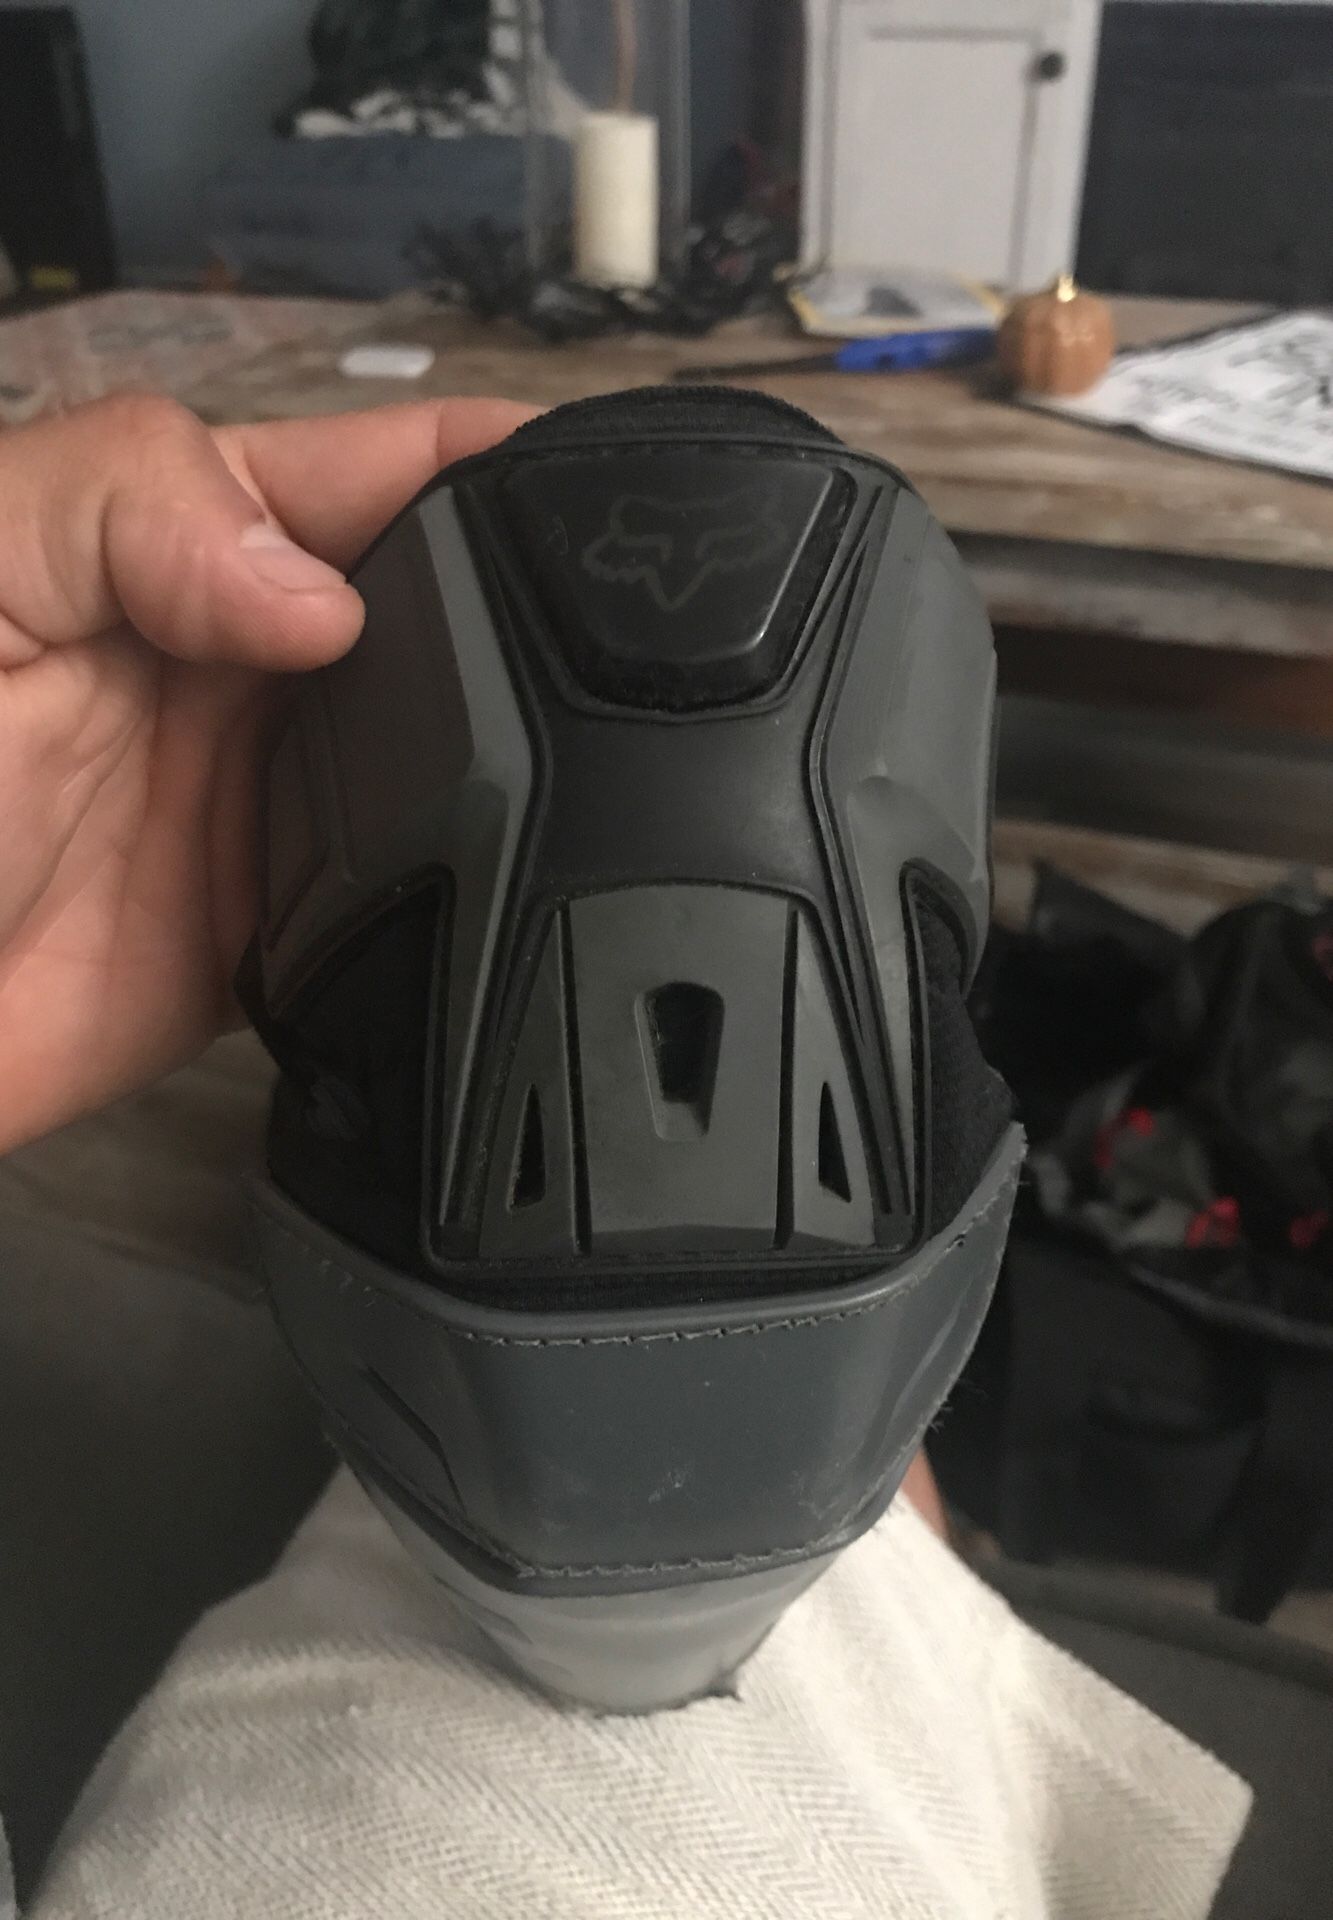 Fox extreme elbow pads $20. Size S/M